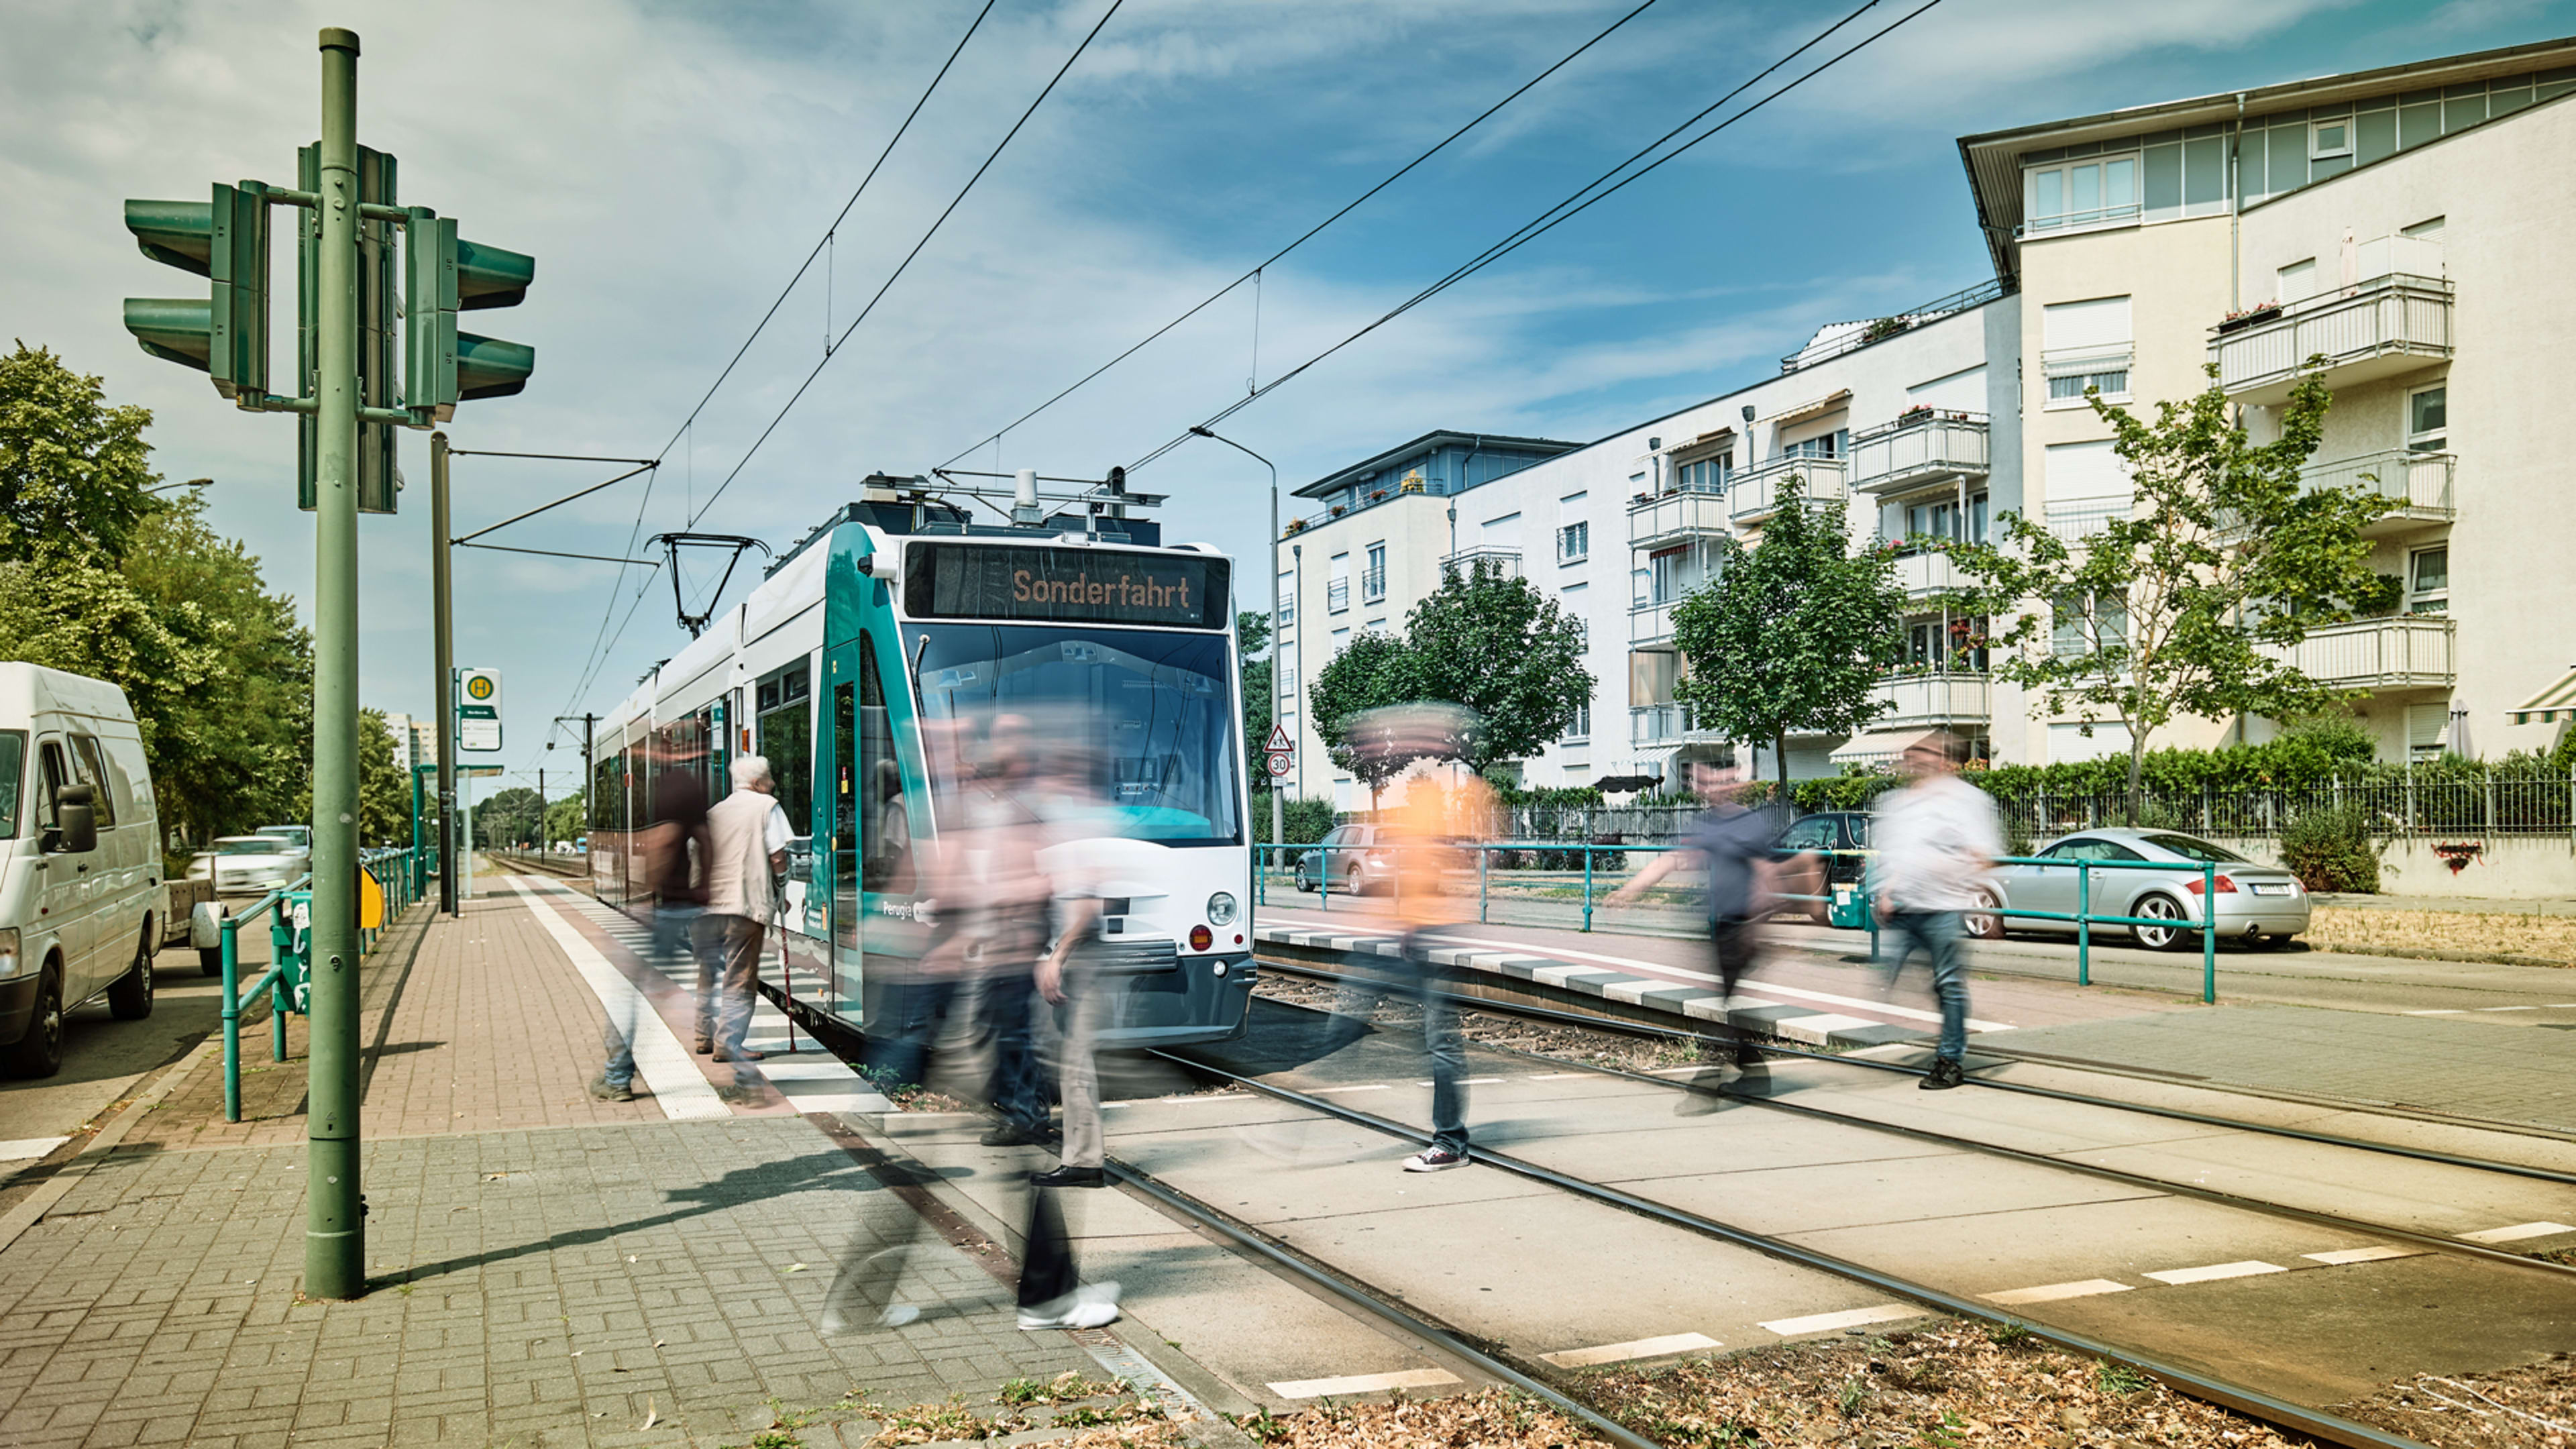 Make way for the world’s first autonomous tram